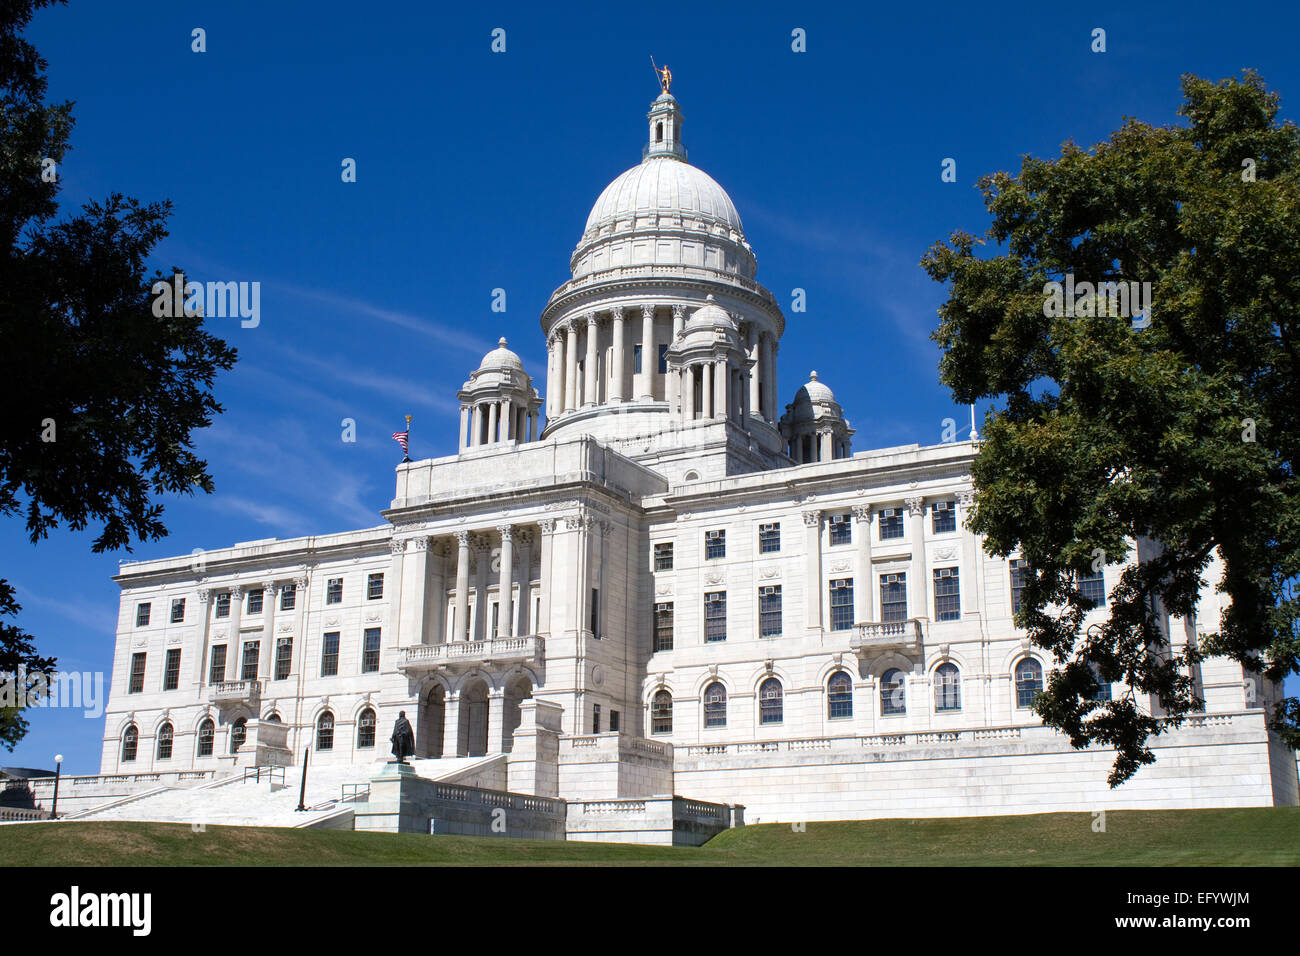 The Rhode Island State House is the capitol of the U.S. state of Rhode Island and is located in the city of Providence shown wit Stock Photo